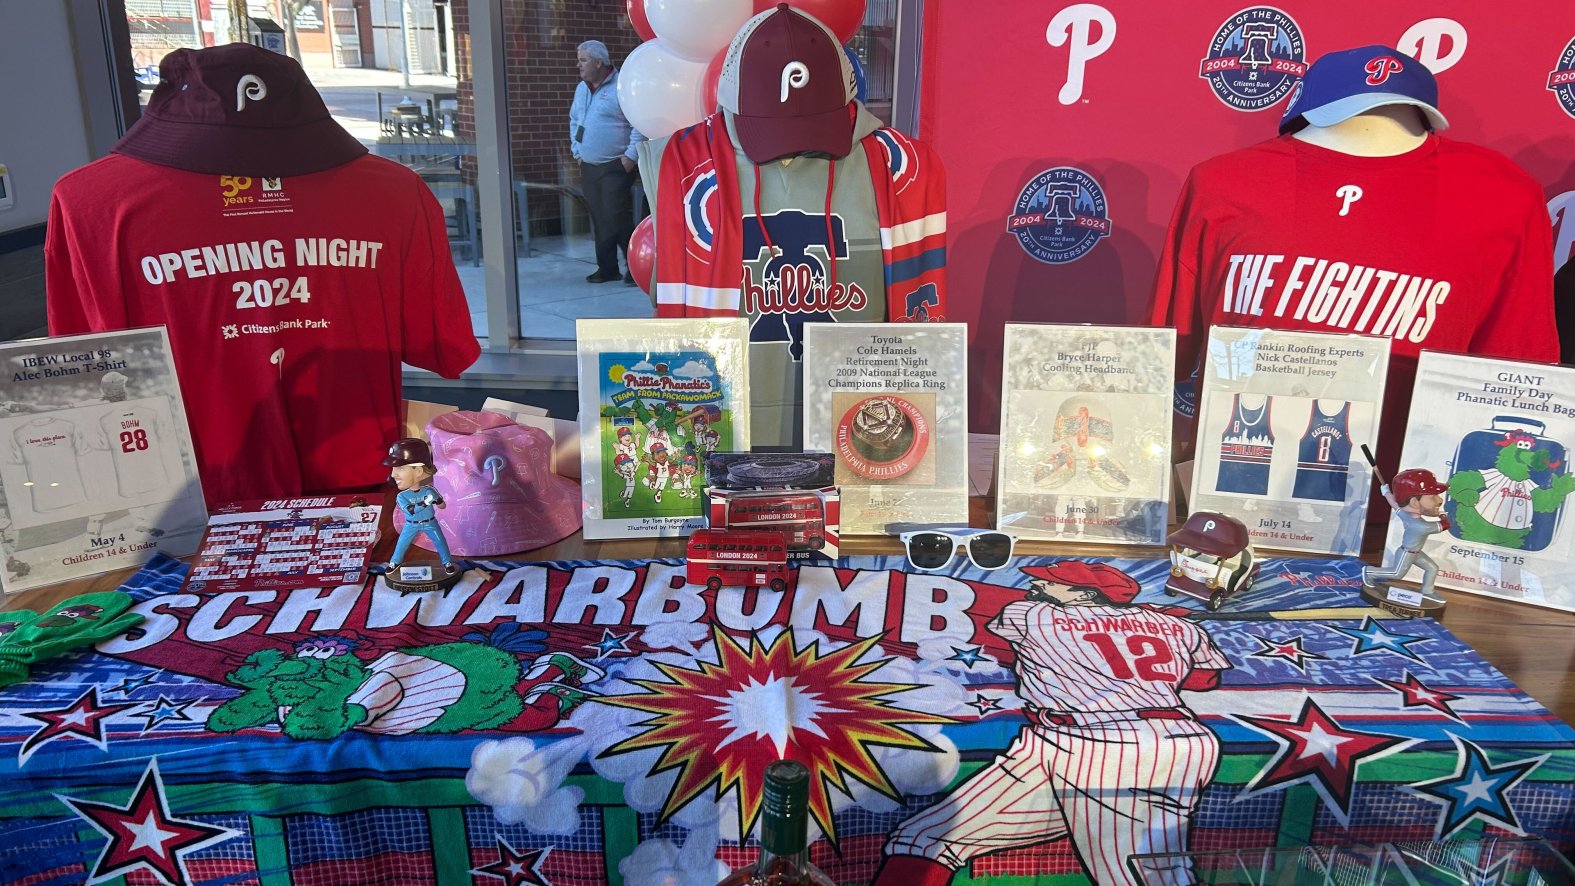 Citizens Bank Park reveals new additions for Phillies 2024 MLB season